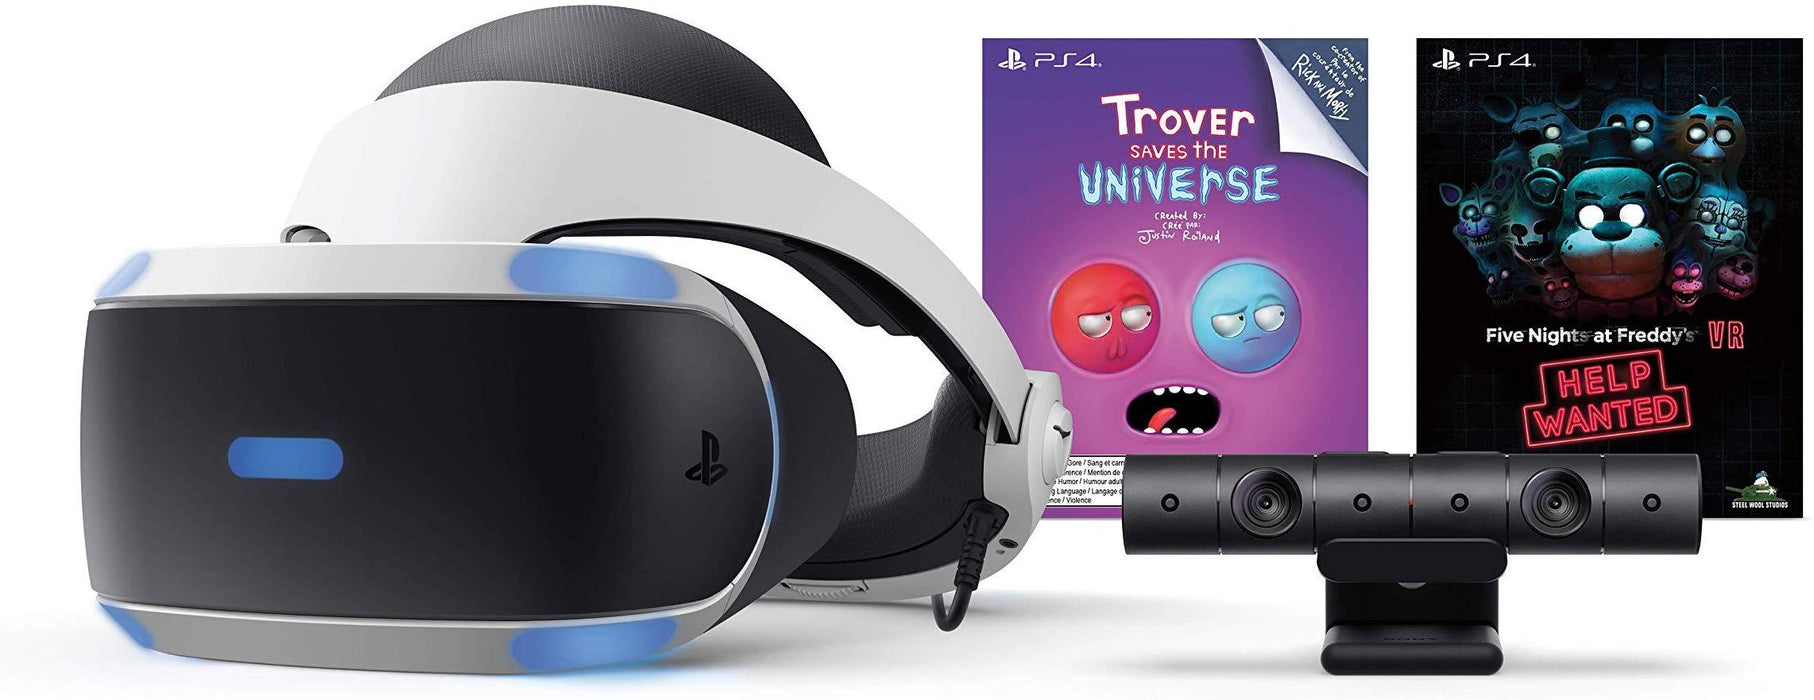 PlayStation VR Trover Saves the Universe + Five Nights at Freddy's VR: Help Wanted Bundle - PSVR [PlayStation 4]